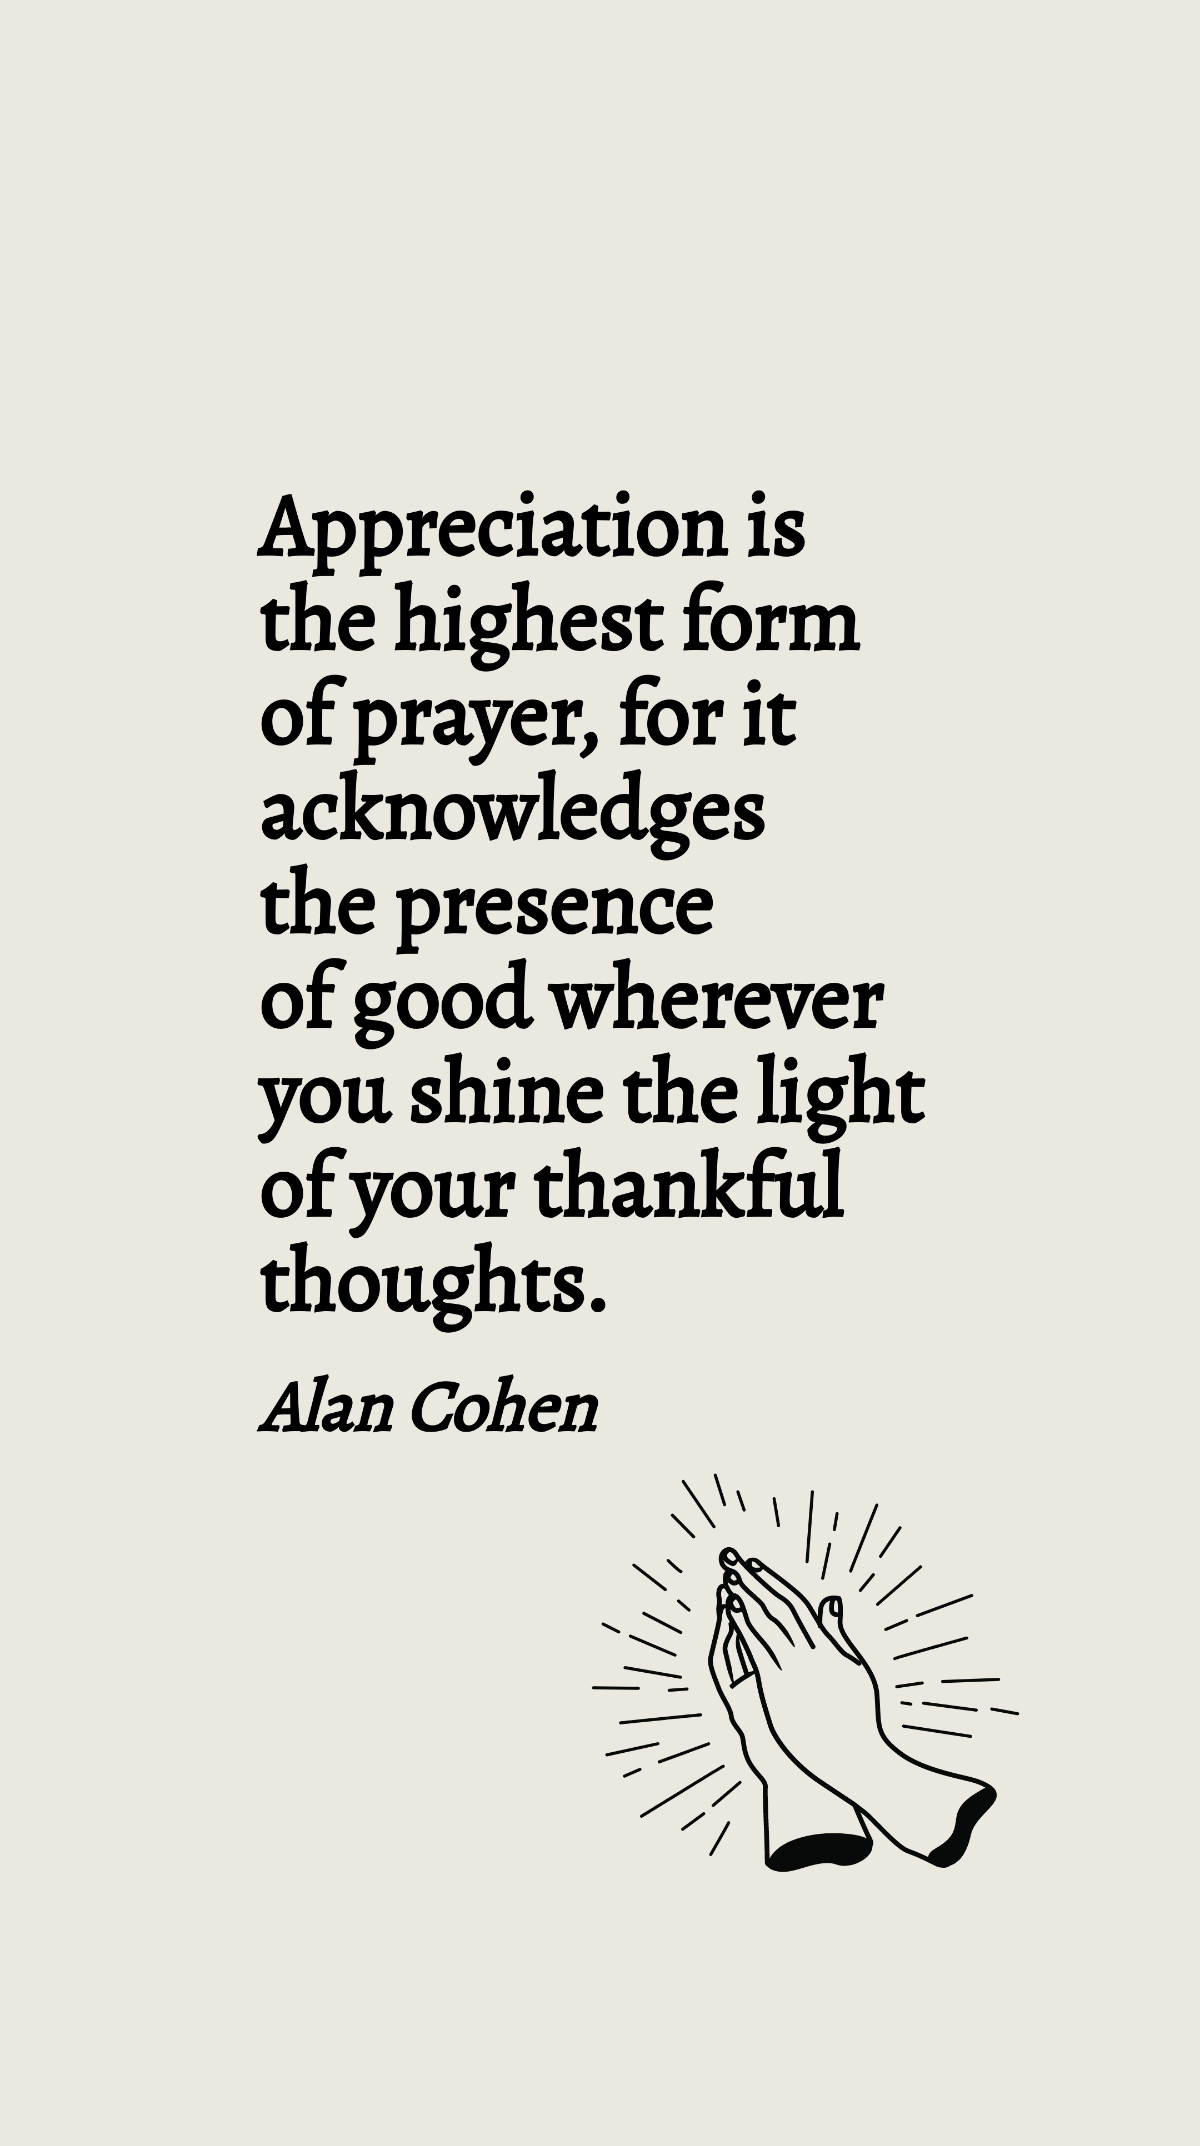 Alan Cohen - Appreciation is the highest form of prayer, for it acknowledges the presence of good wherever you shine the light of your thankful thoughts.